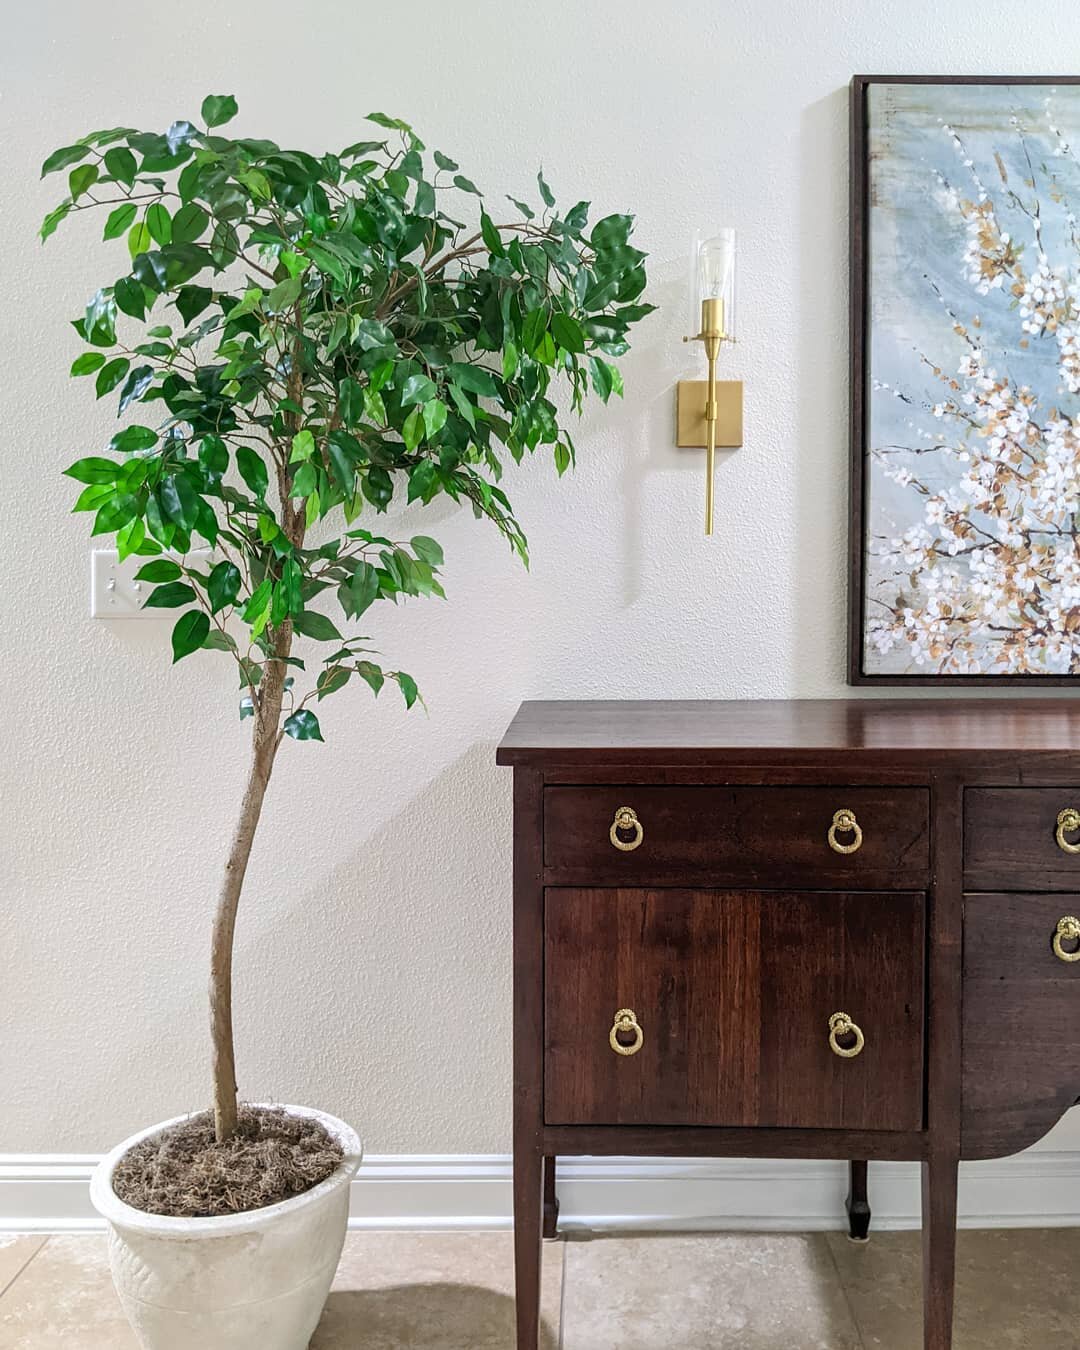 When I couldn't find a faux tree for our family room that gets no natural light, I decided to DIY one! New ones that I loved were out of my price range so making one sounded like the best option for me. I bought an old faux ficus tree from Facebook M